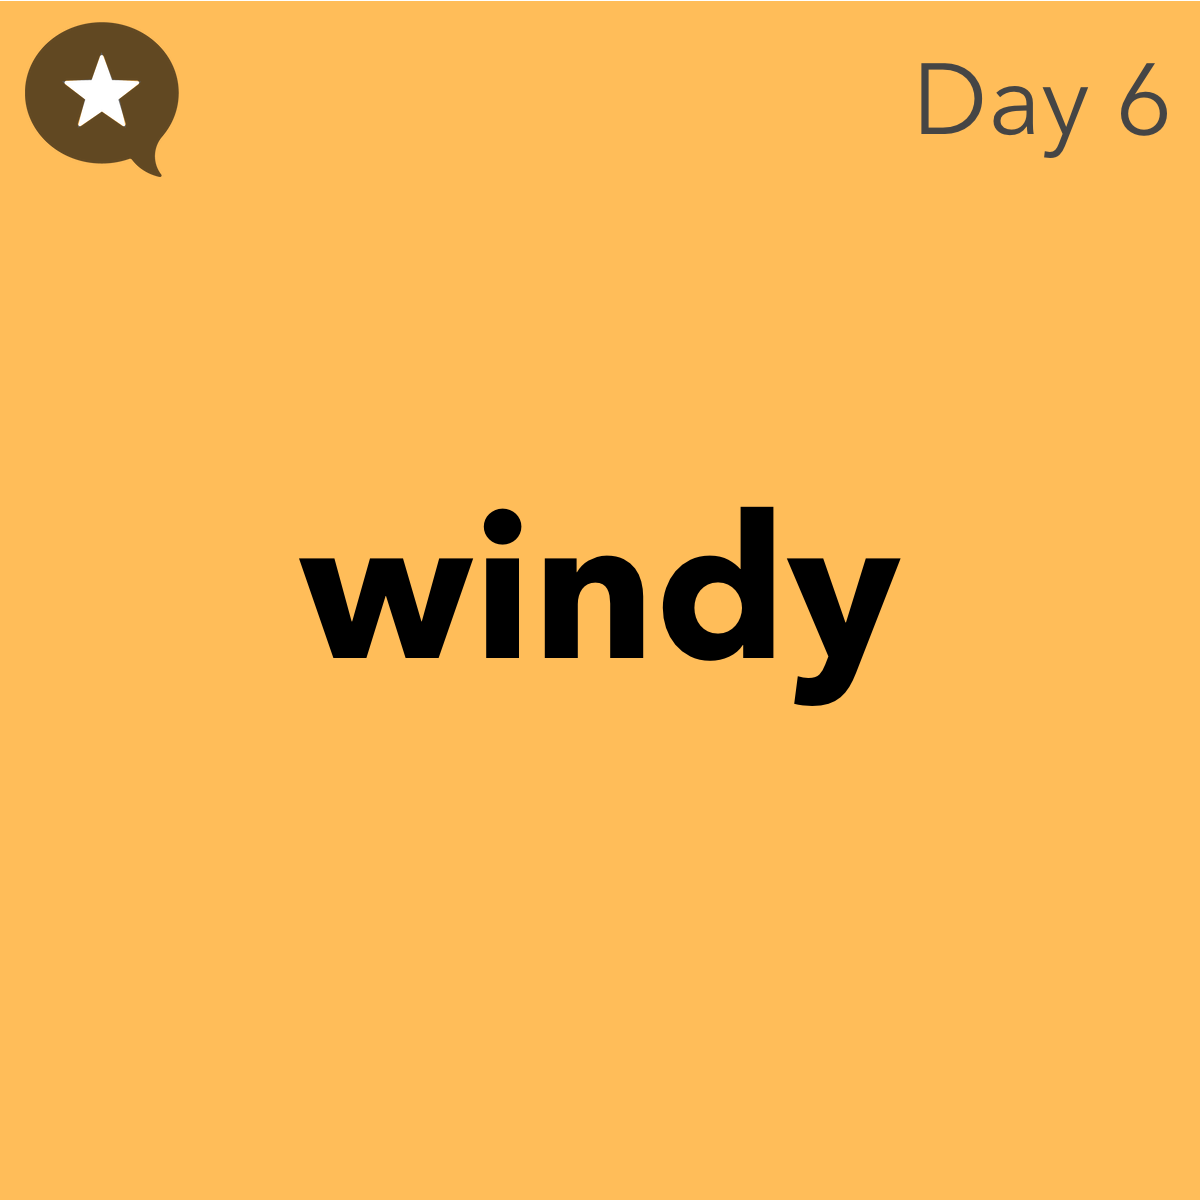 Day 6 windy graphic